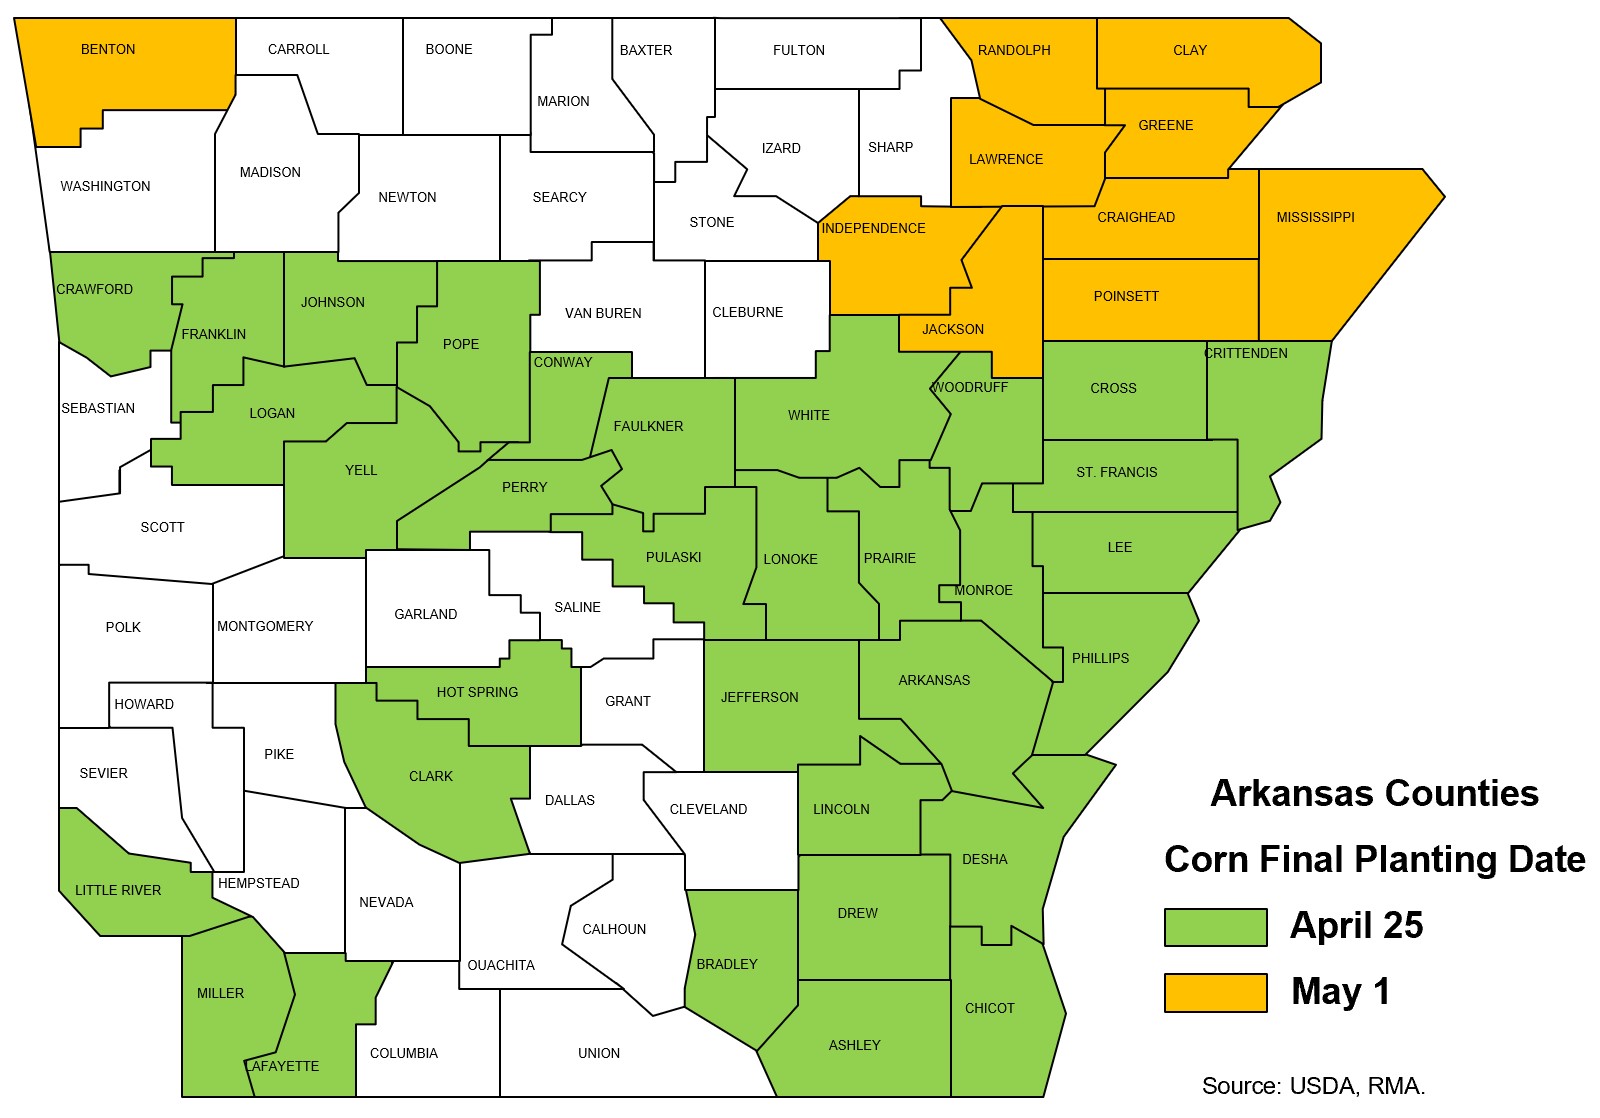 Map of Arkansas counties indicating the final corn planting date for crop insurance. Counties in yellow have a date of May 1. Counties in green have a date of April 25